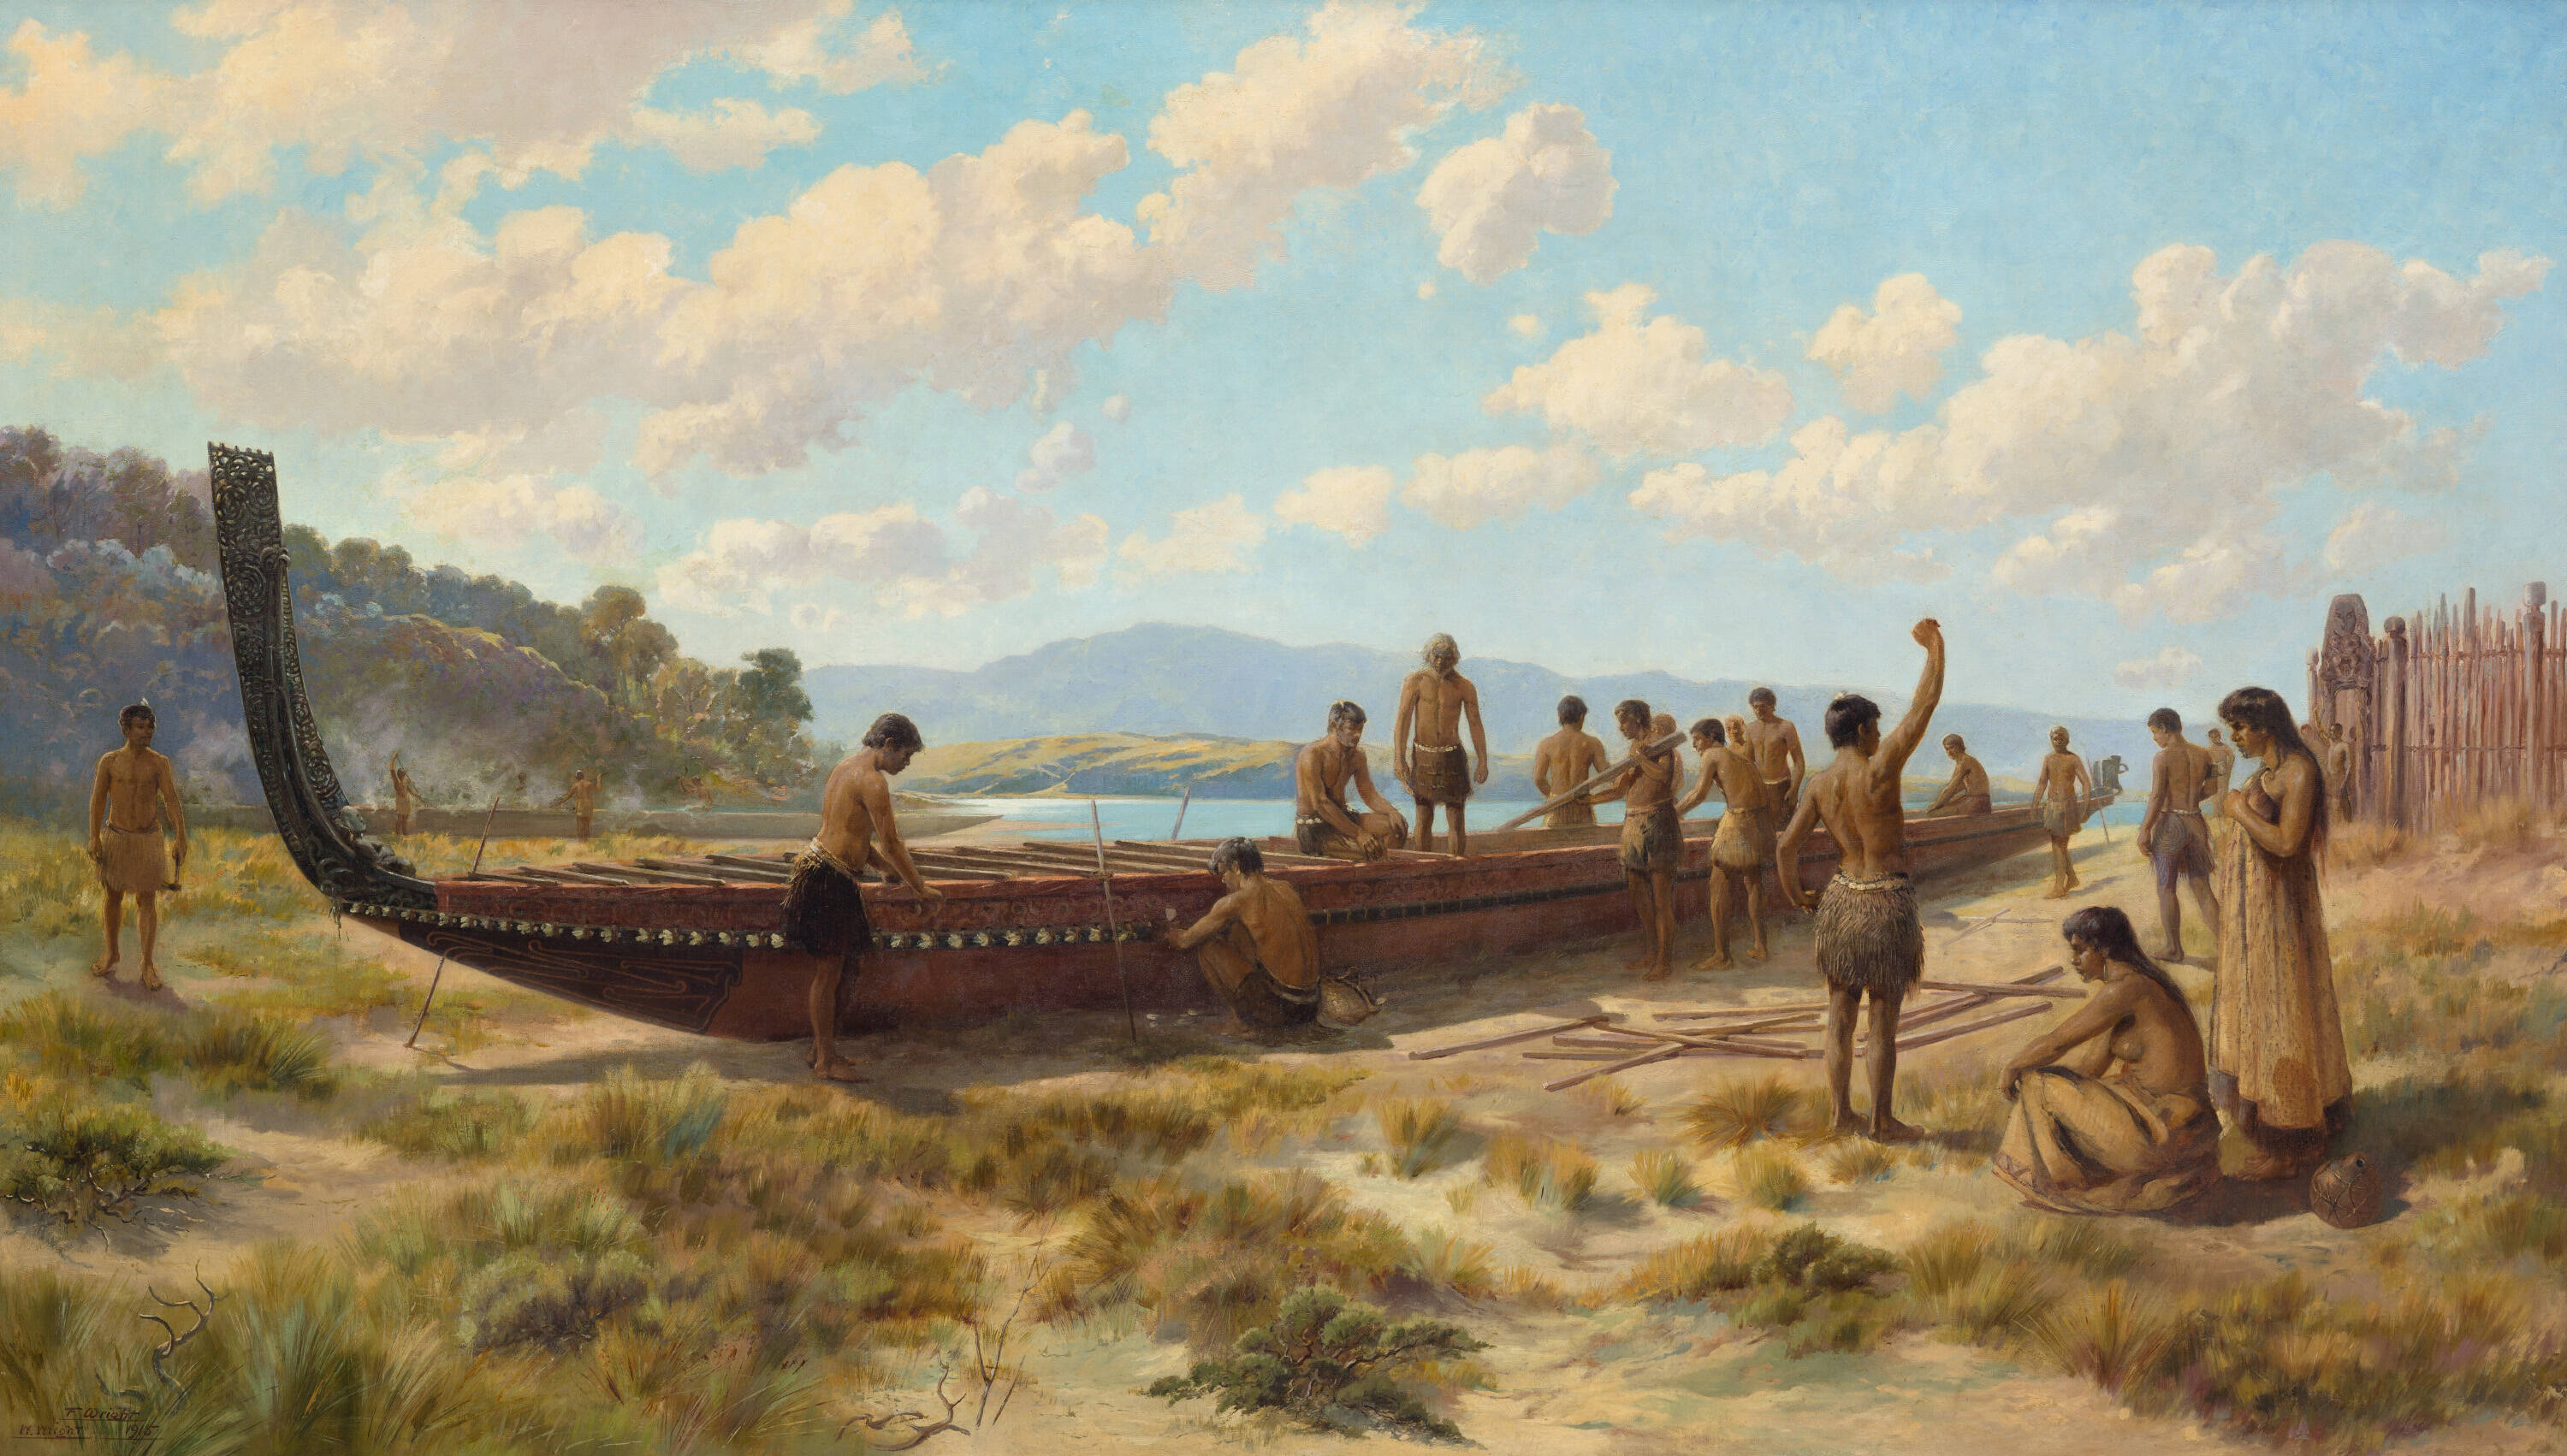 <p>Image credit</p>

<p><strong>Frank Wright,&nbsp;Walter Wright</strong>, <em>The Canoe Builders</em>, 1915, oil on canvas,&nbsp;Auckland Art Gallery Toi o Tāmaki, gift of Mr C J Parr, 1915.</p>
